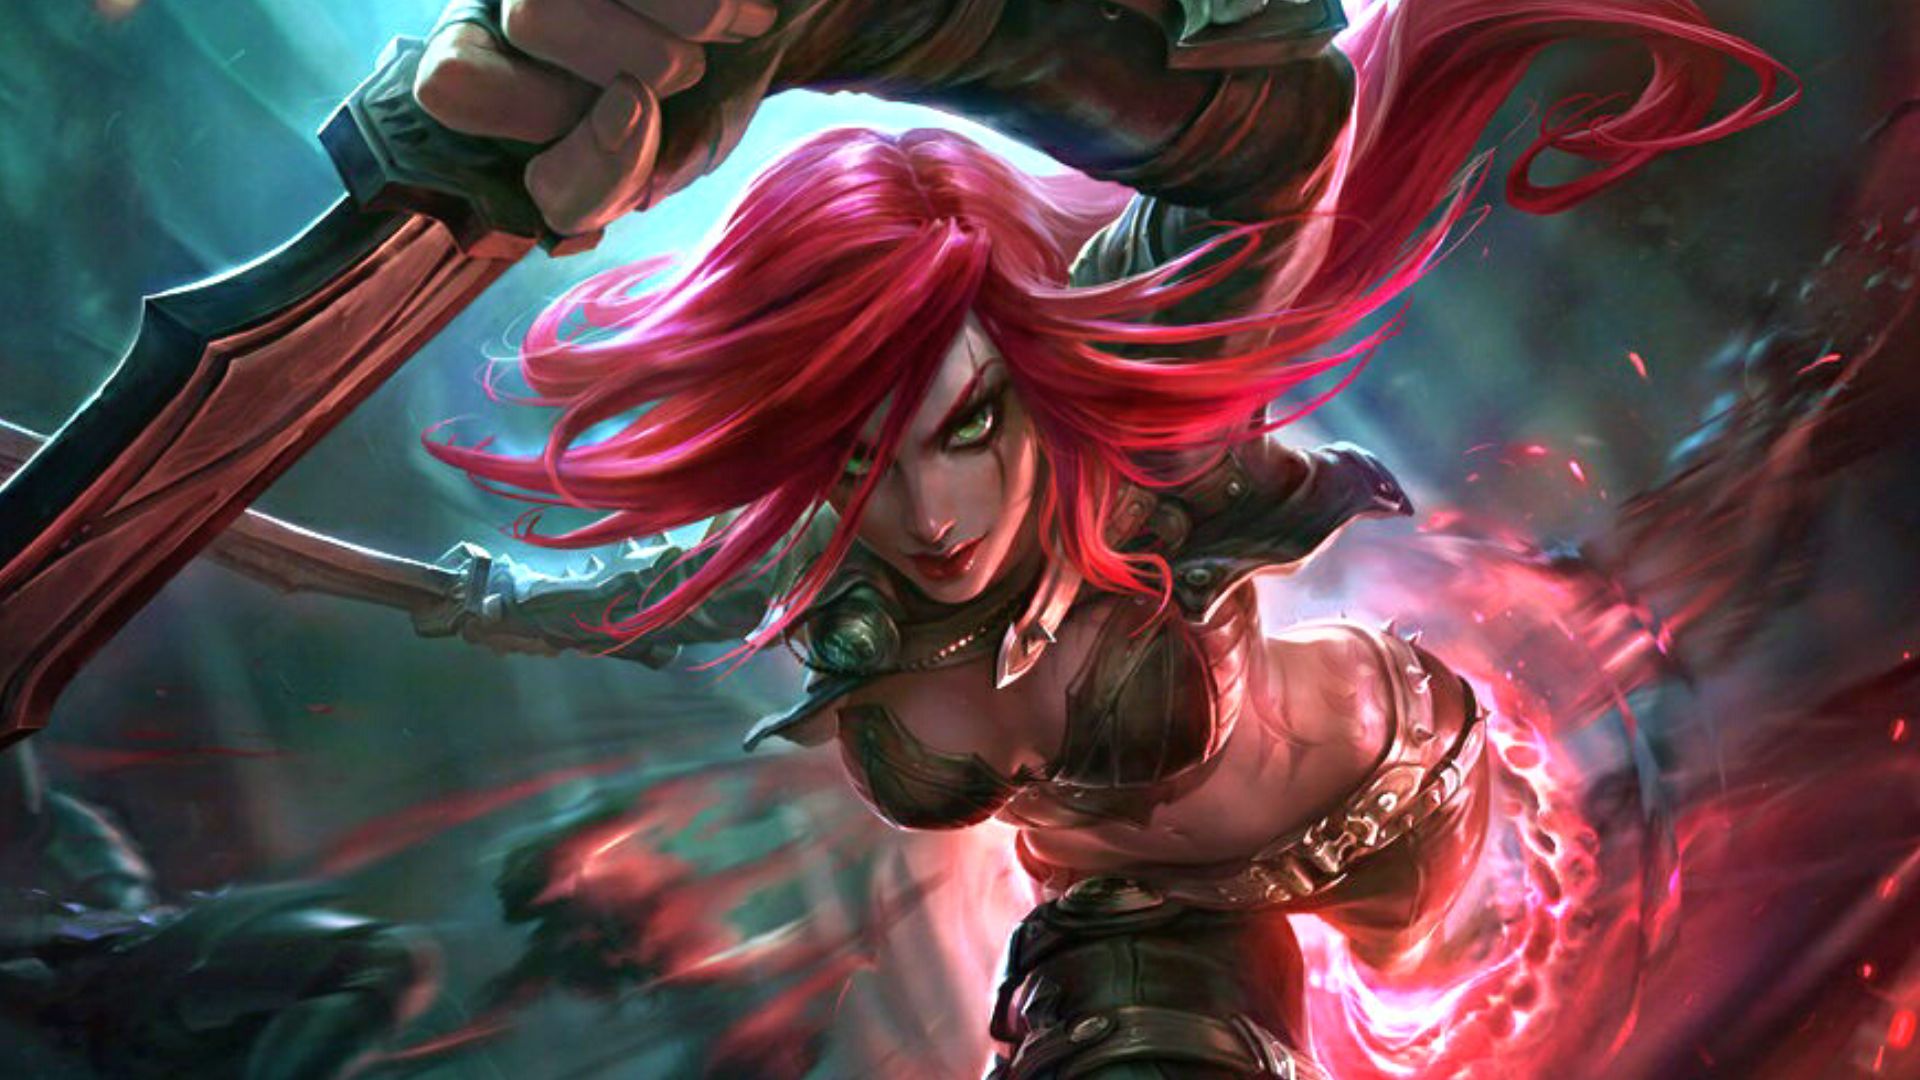 Mesmerizing POV Animation Takes League of Legends Fans by Storm